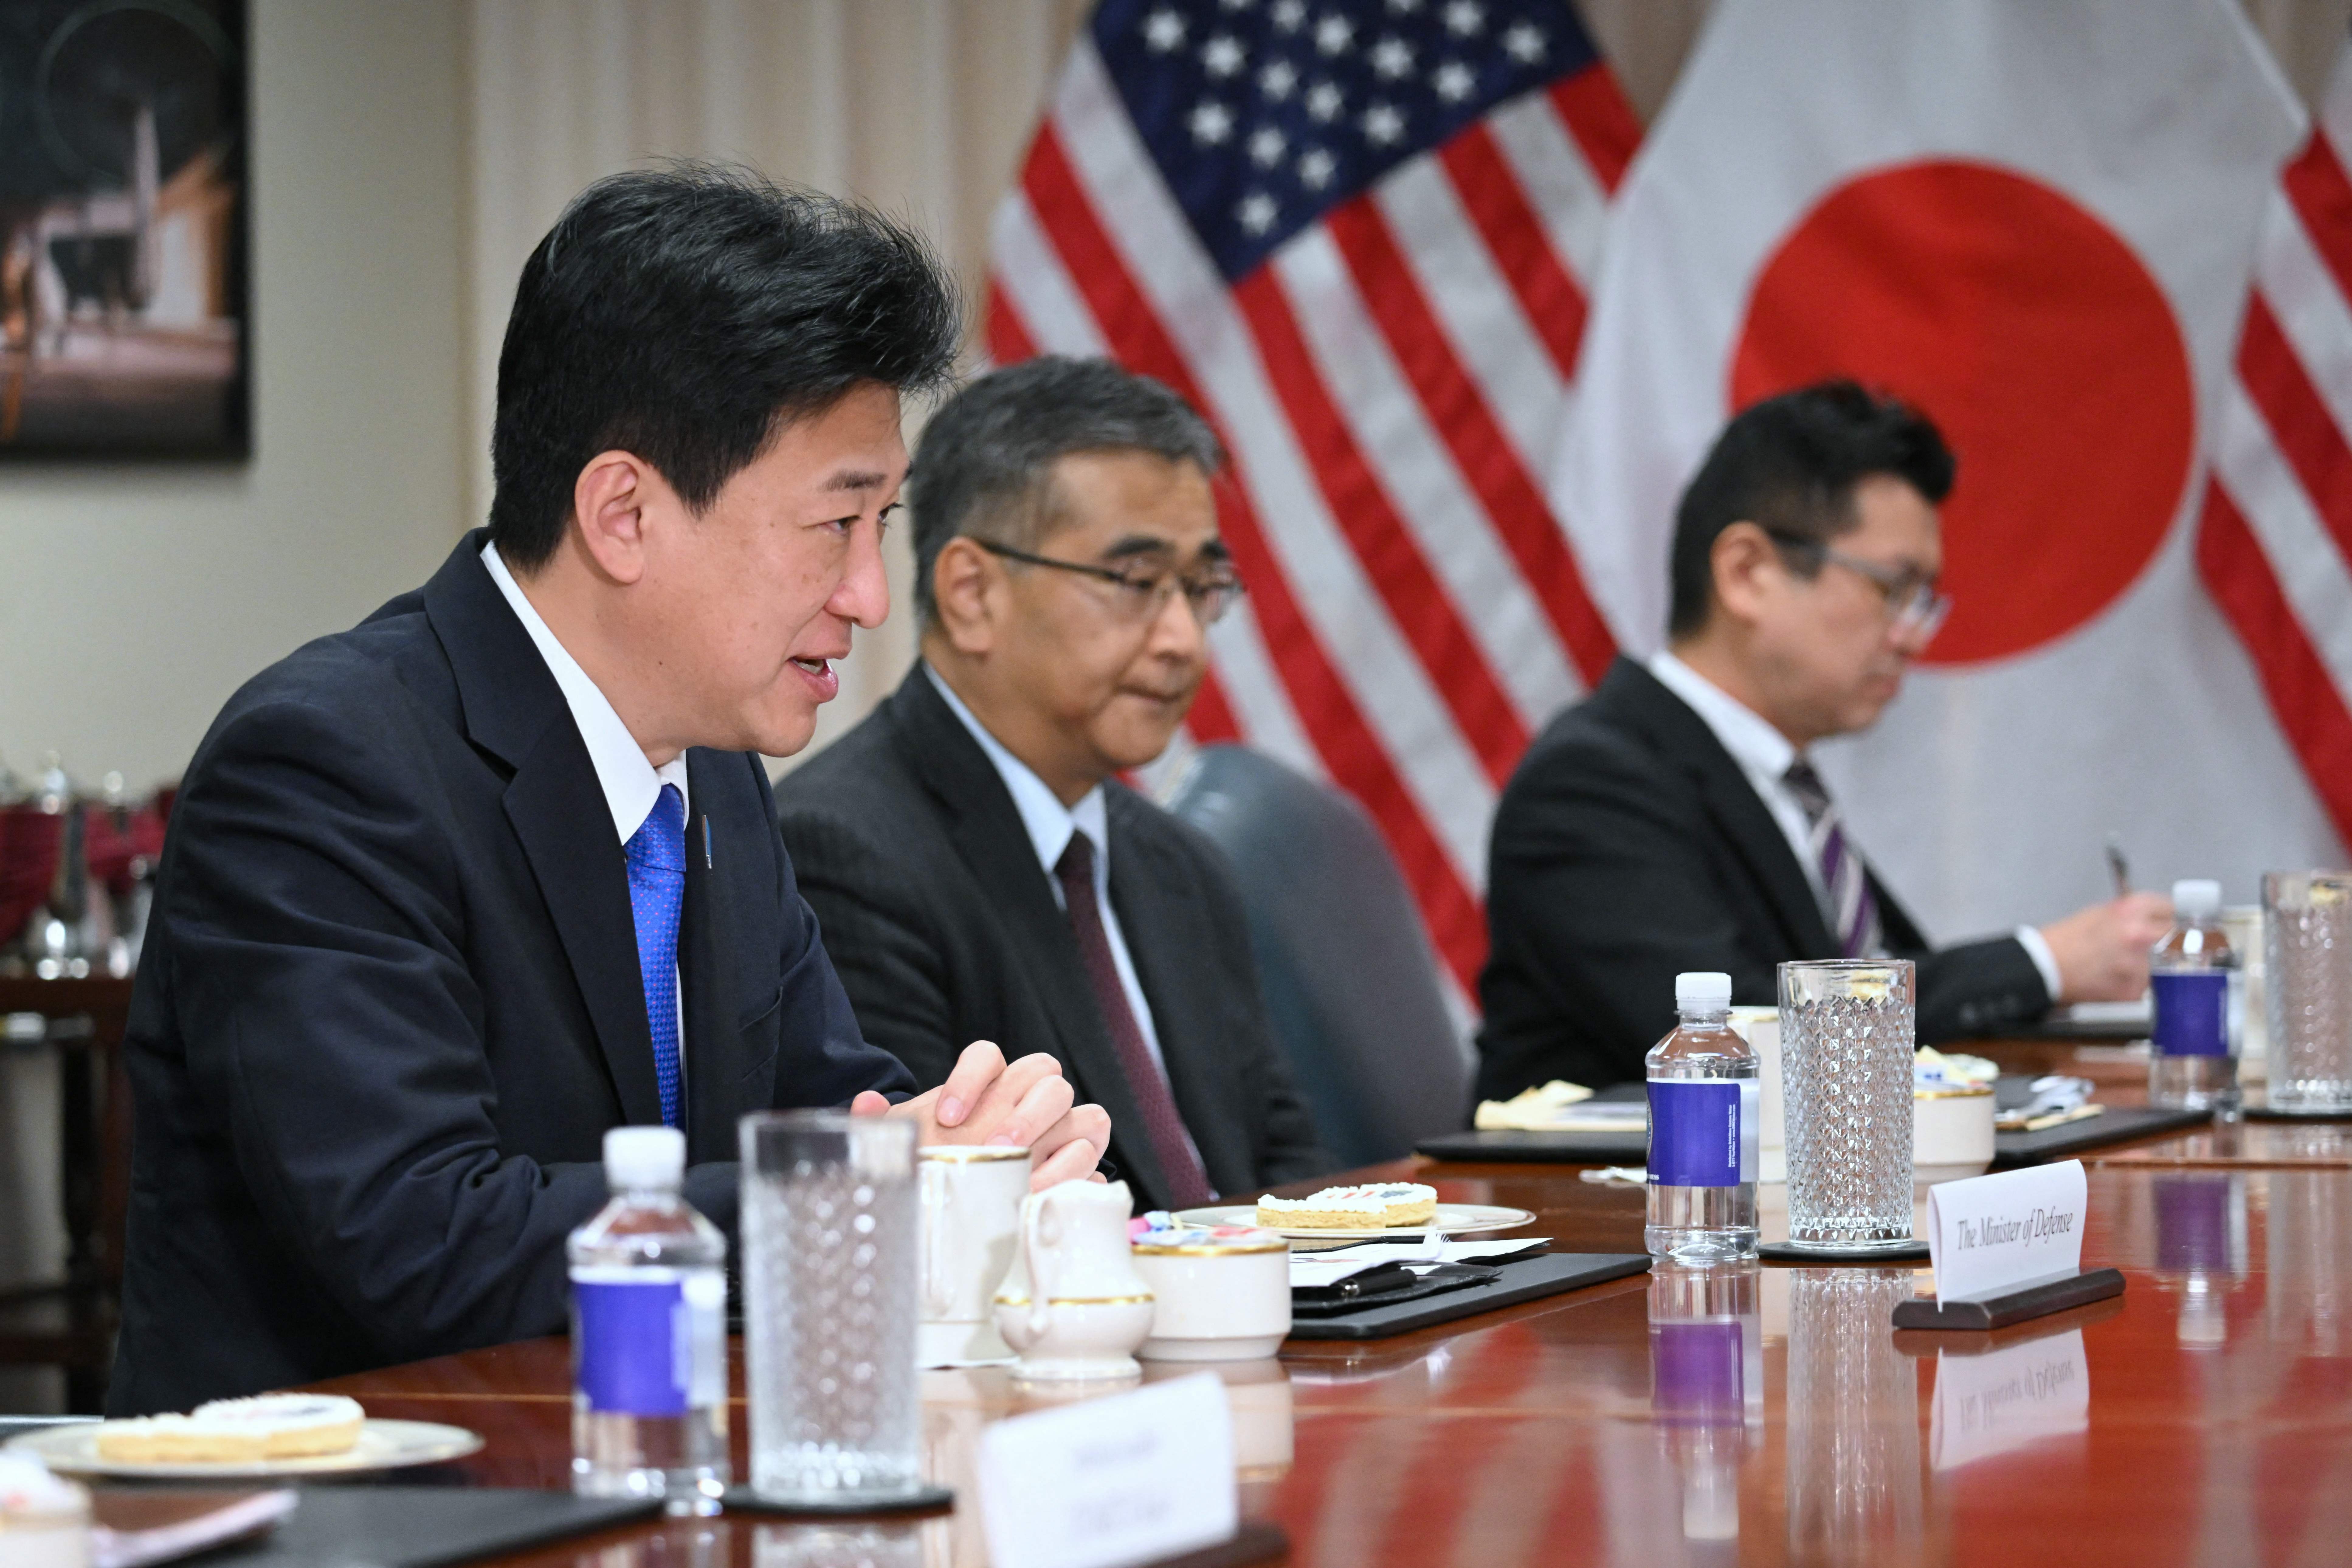 Japanese Minister of Defense Minoru Kihara speaks during a meeting with US Defense Secretary Lloyd Austin, not pictured, at the Pentagon in Washington, DC, on October 4, 2023. (Photo by Mandel NGAN / AFP) (Photo by MANDEL NGAN/AFP via Getty Images)